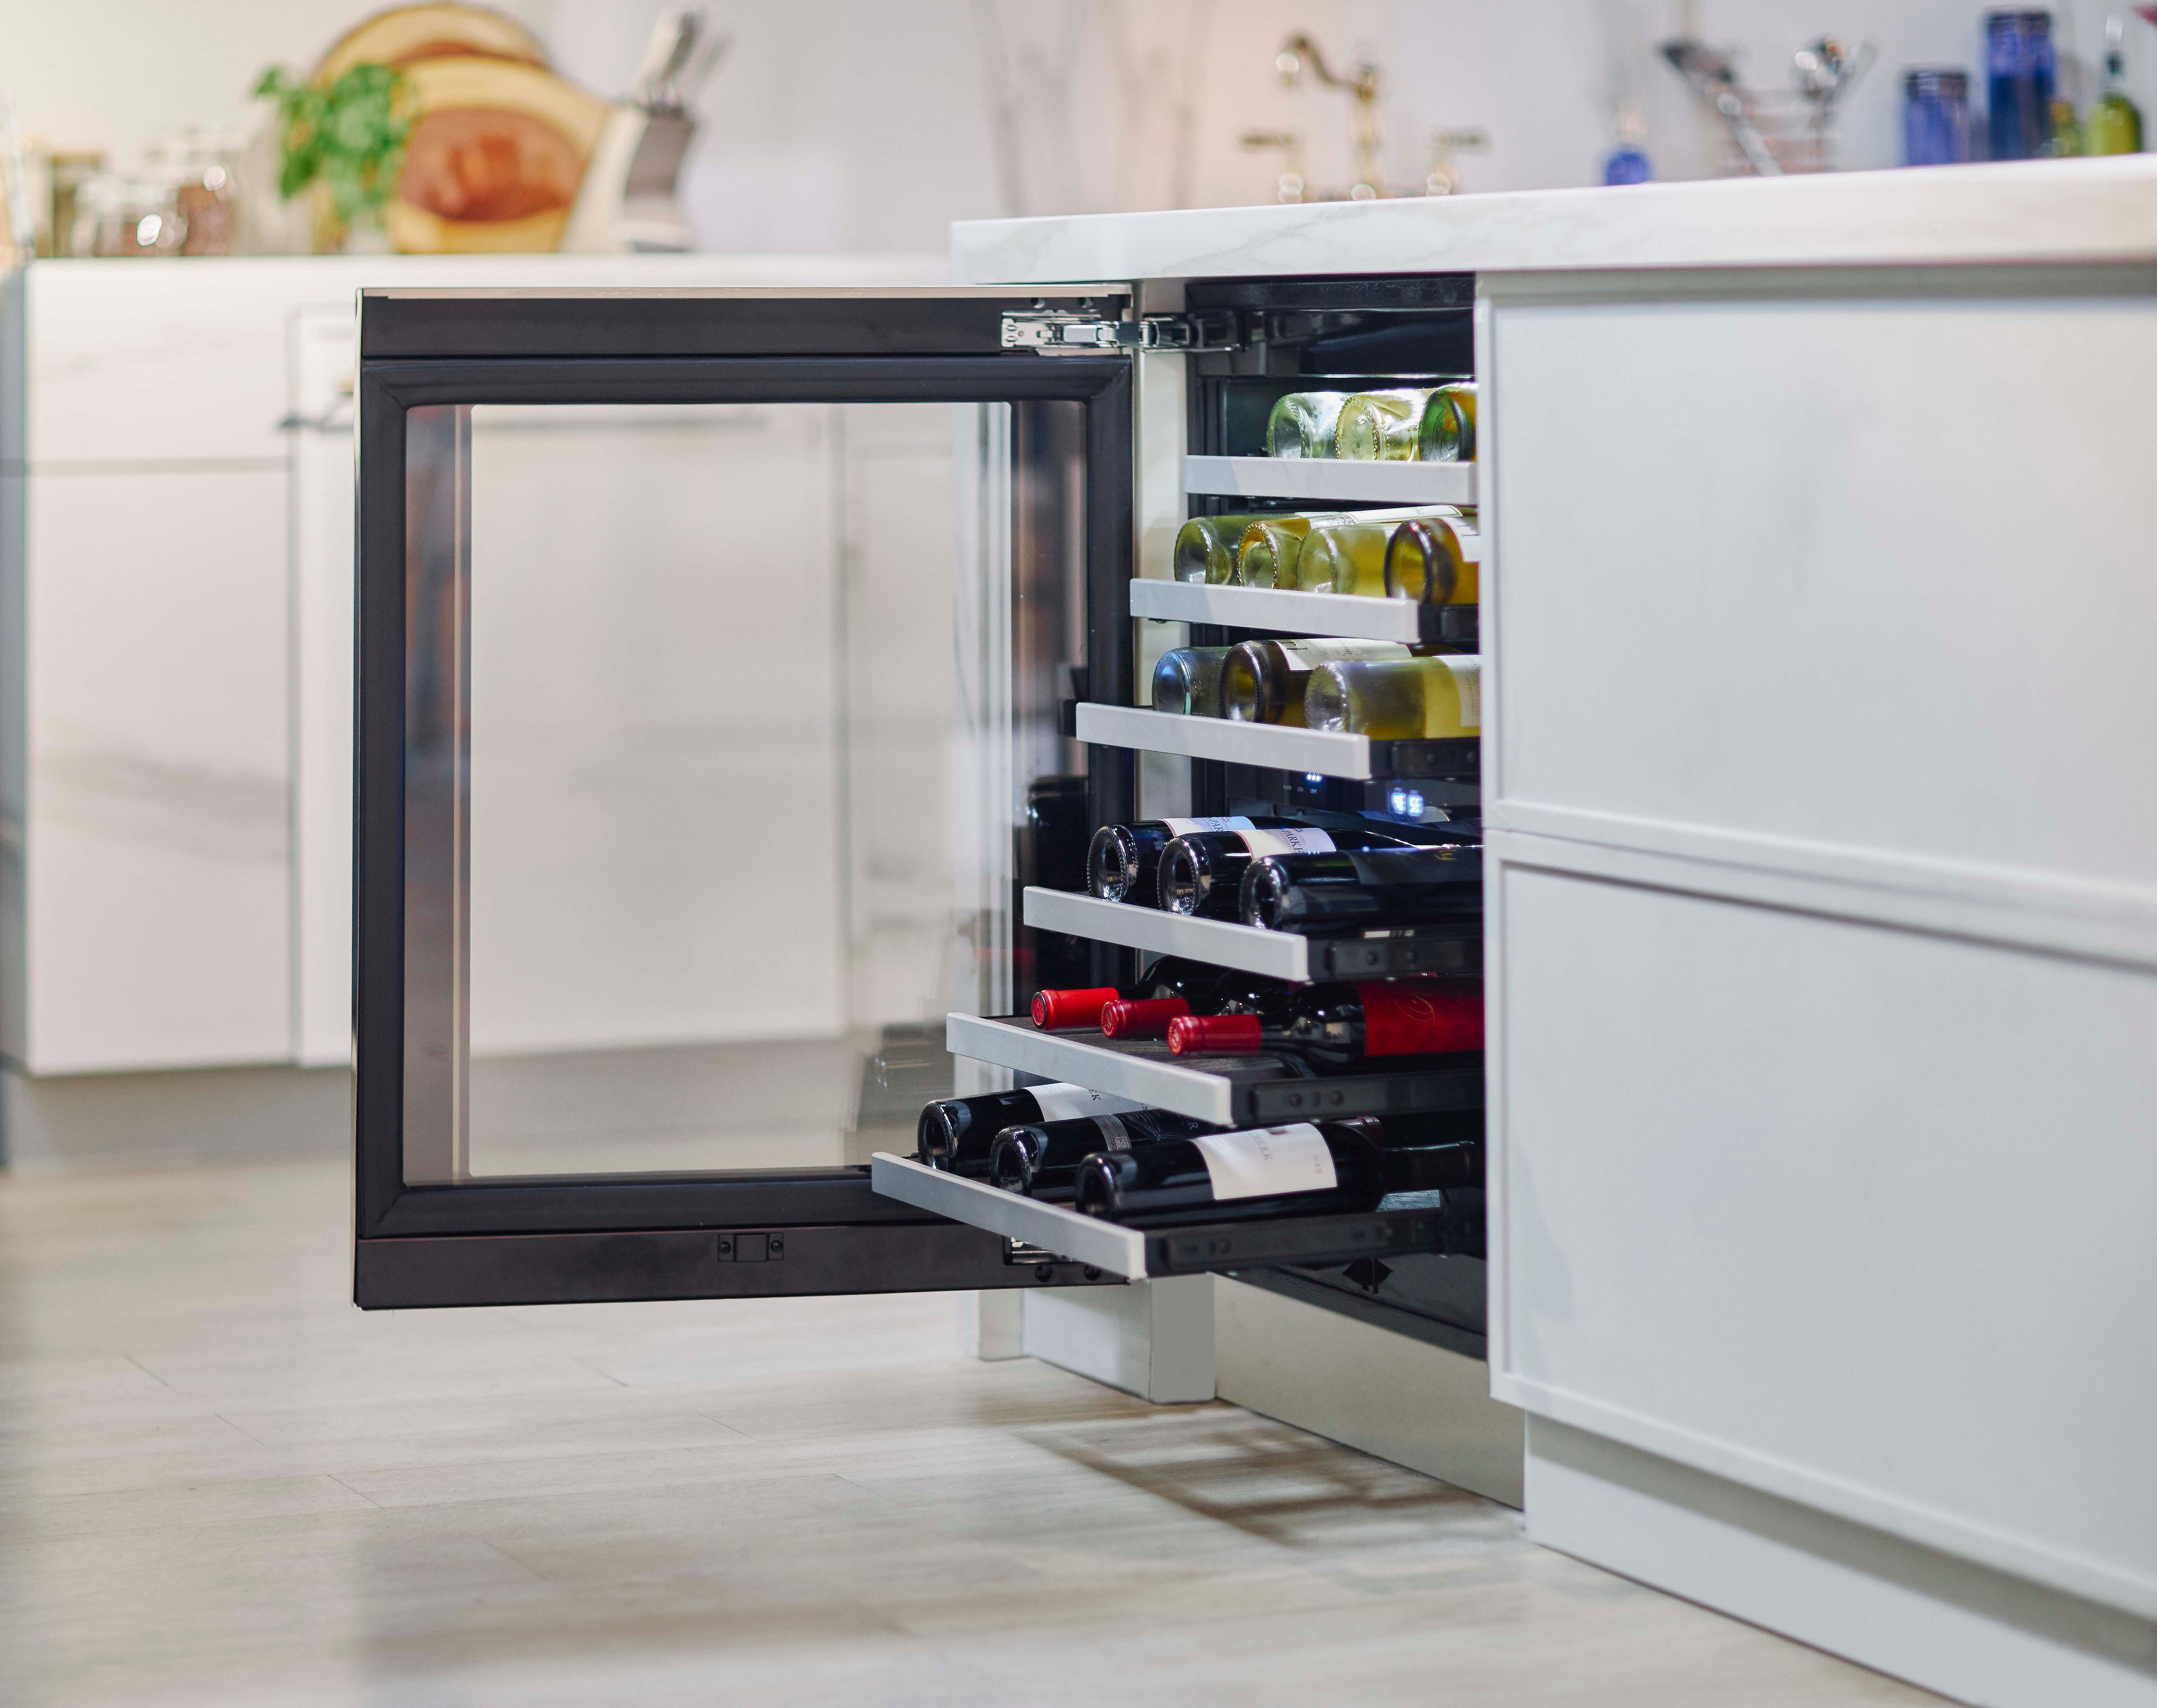 wine racks pulled out of under-counter Thermador wine cooler